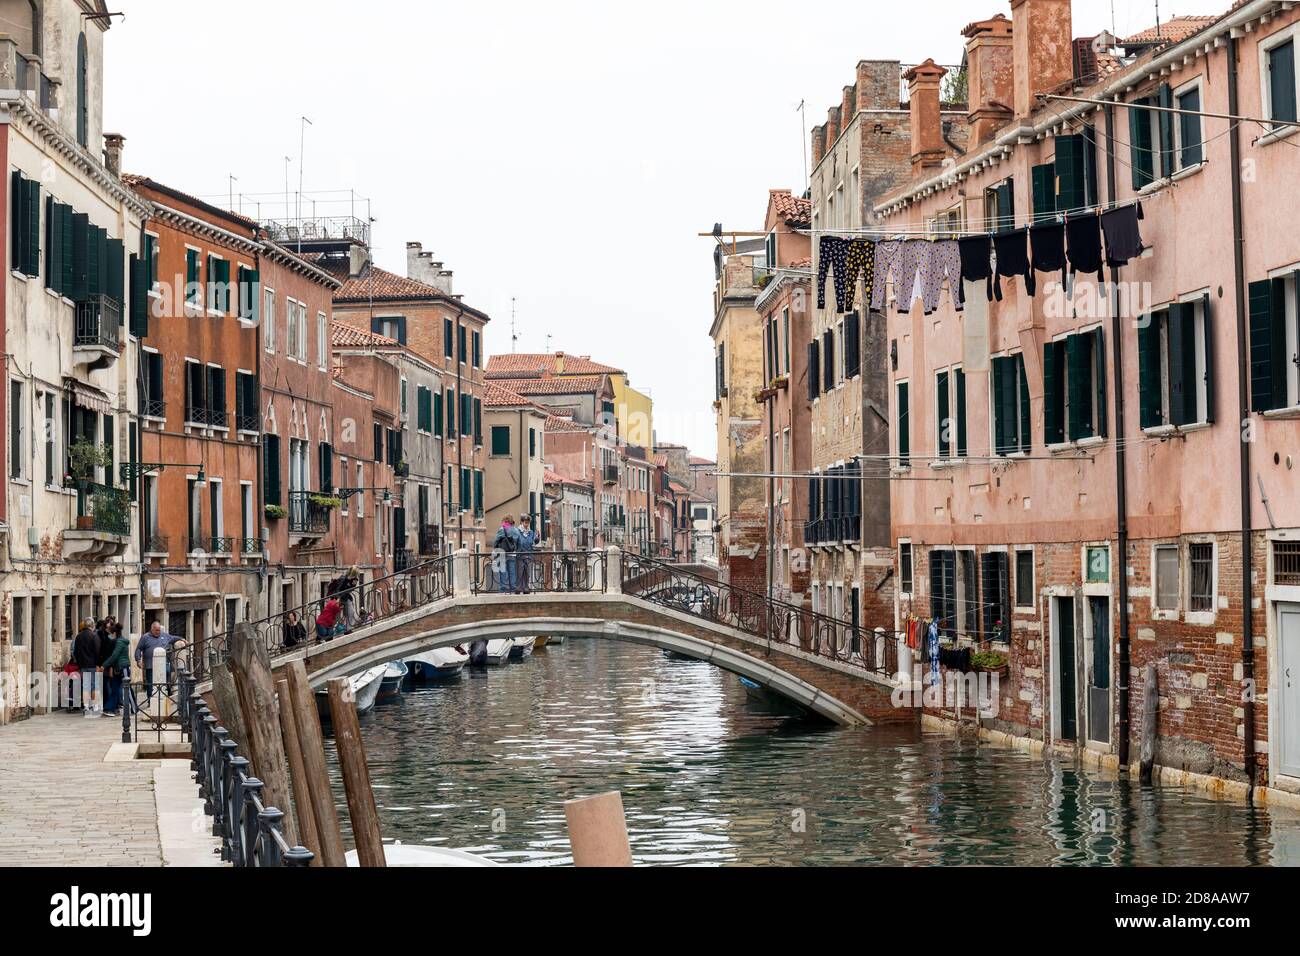 Washing hanging out to dry over the canal in Rio di Sant Anna, Castello region of Venice, Italy 2020 Stock Photo